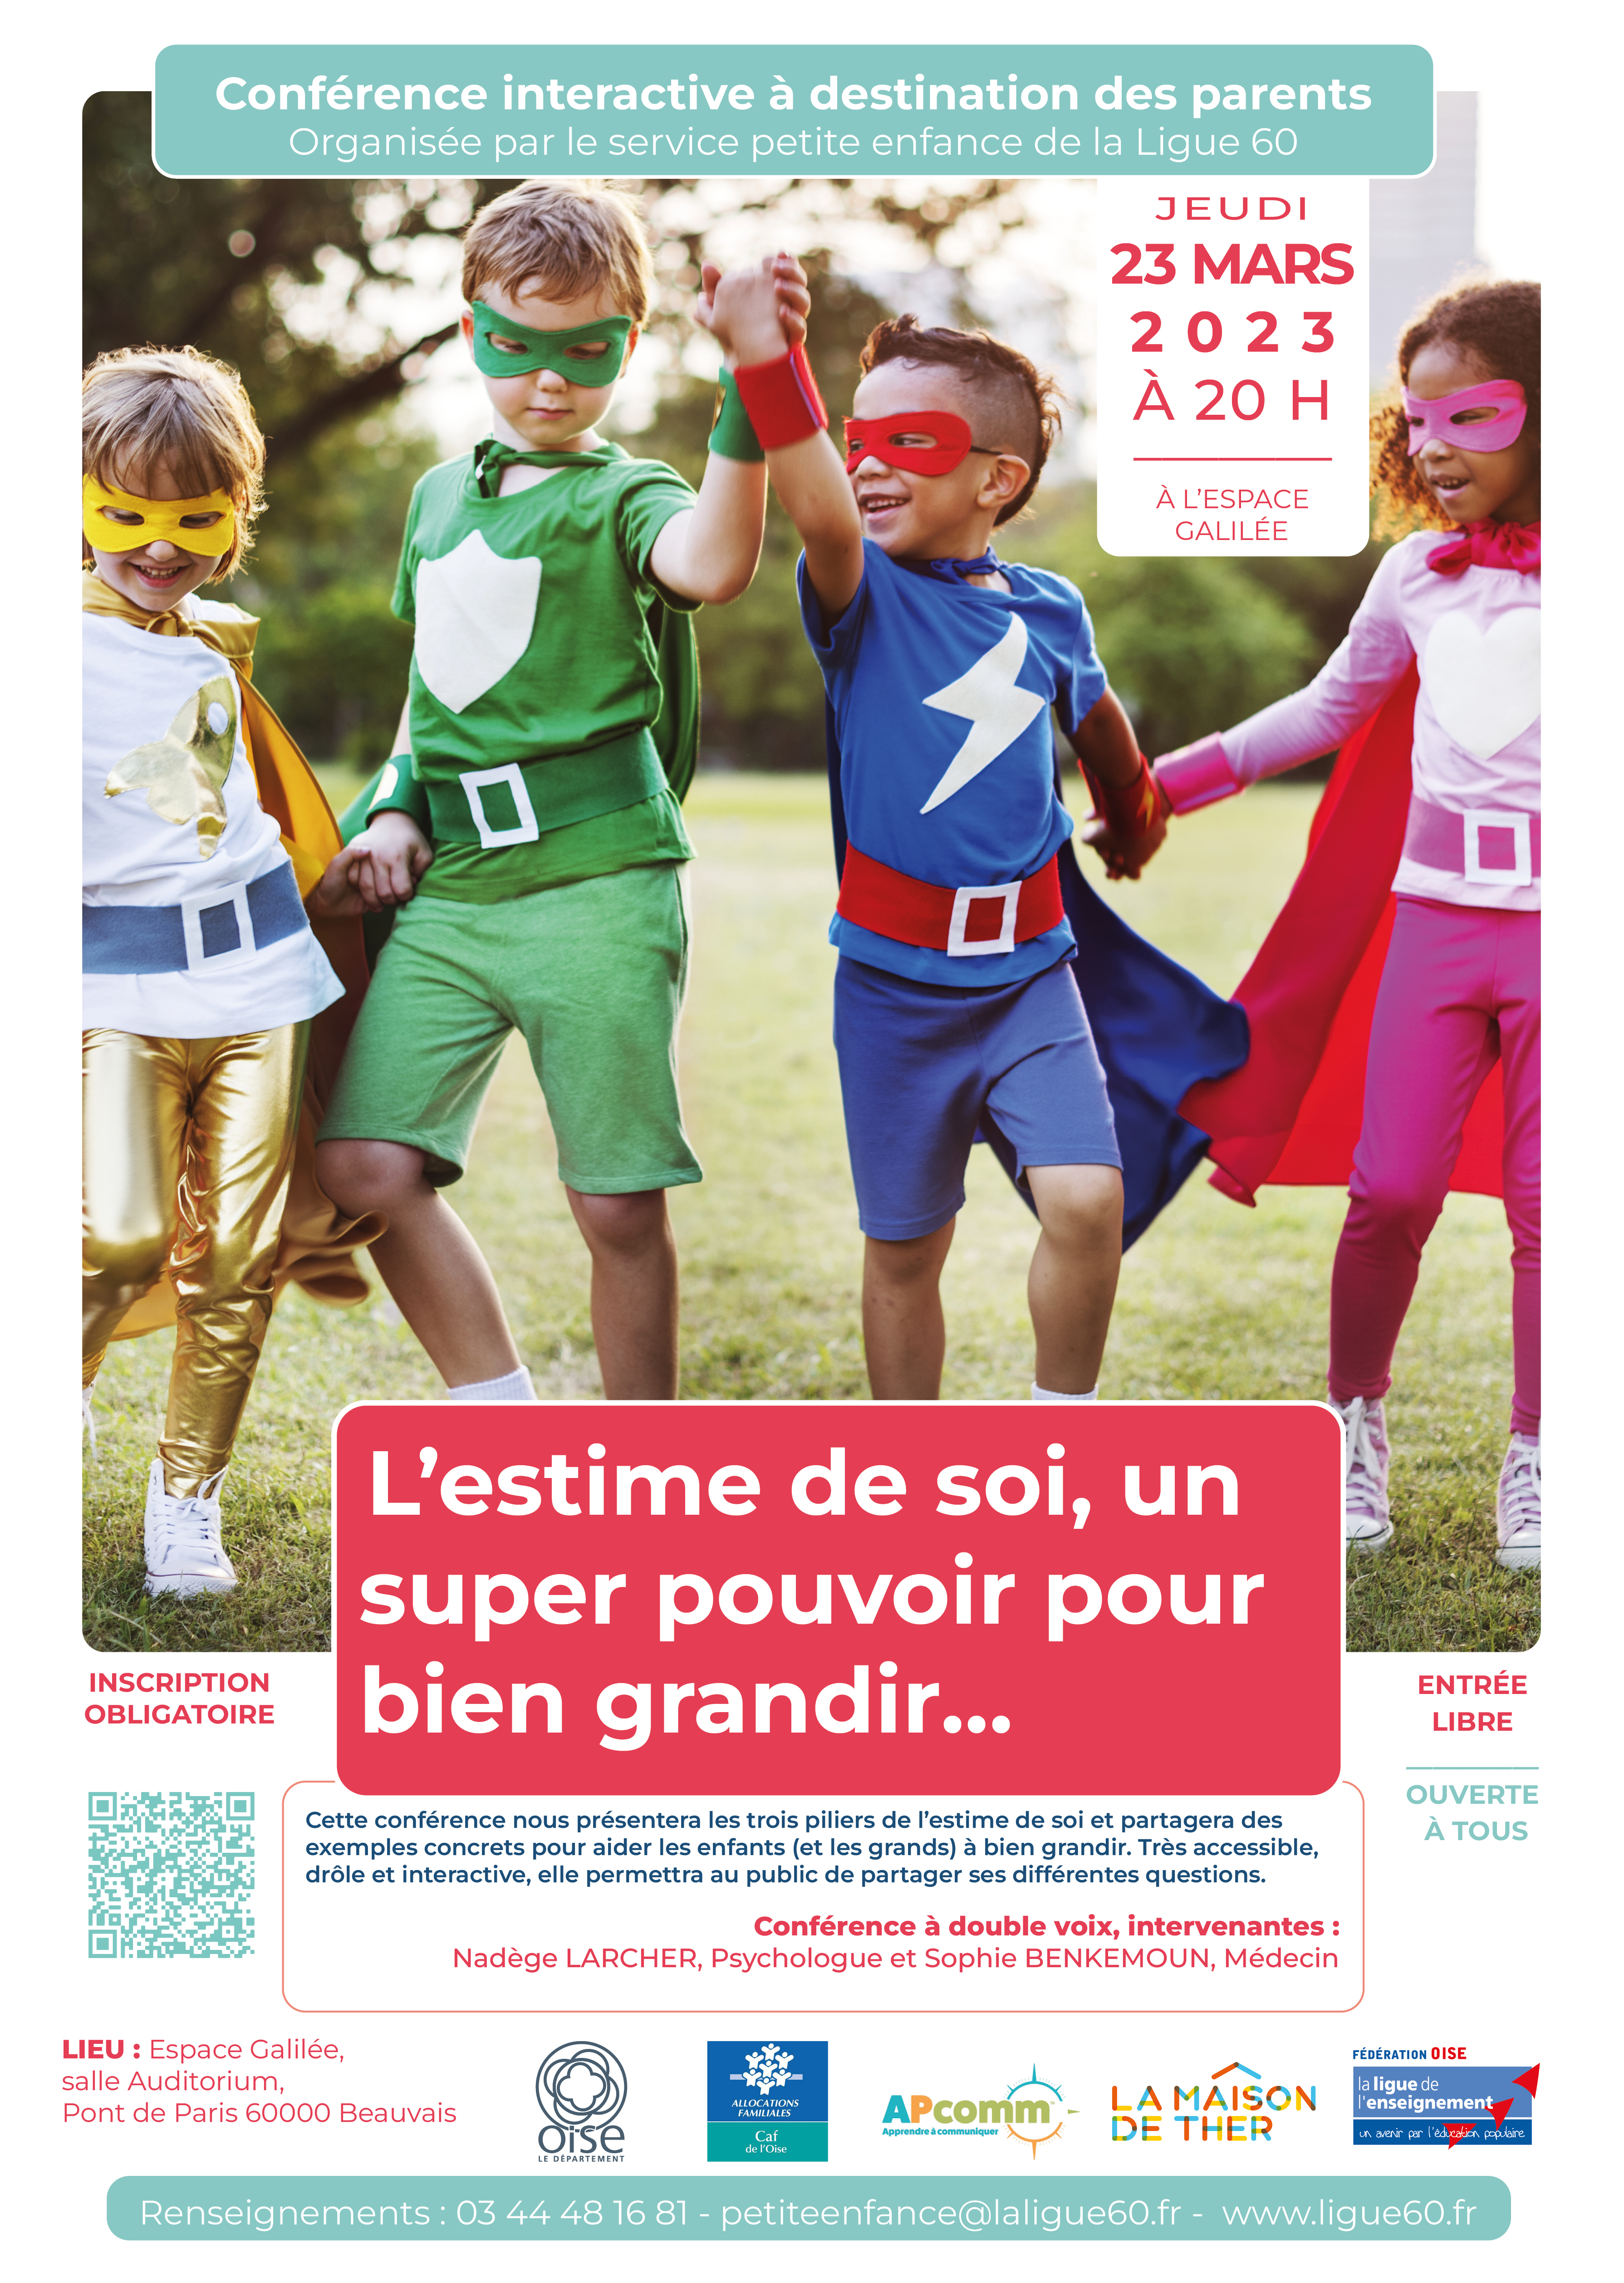 Affiche conference 23 mars 2023